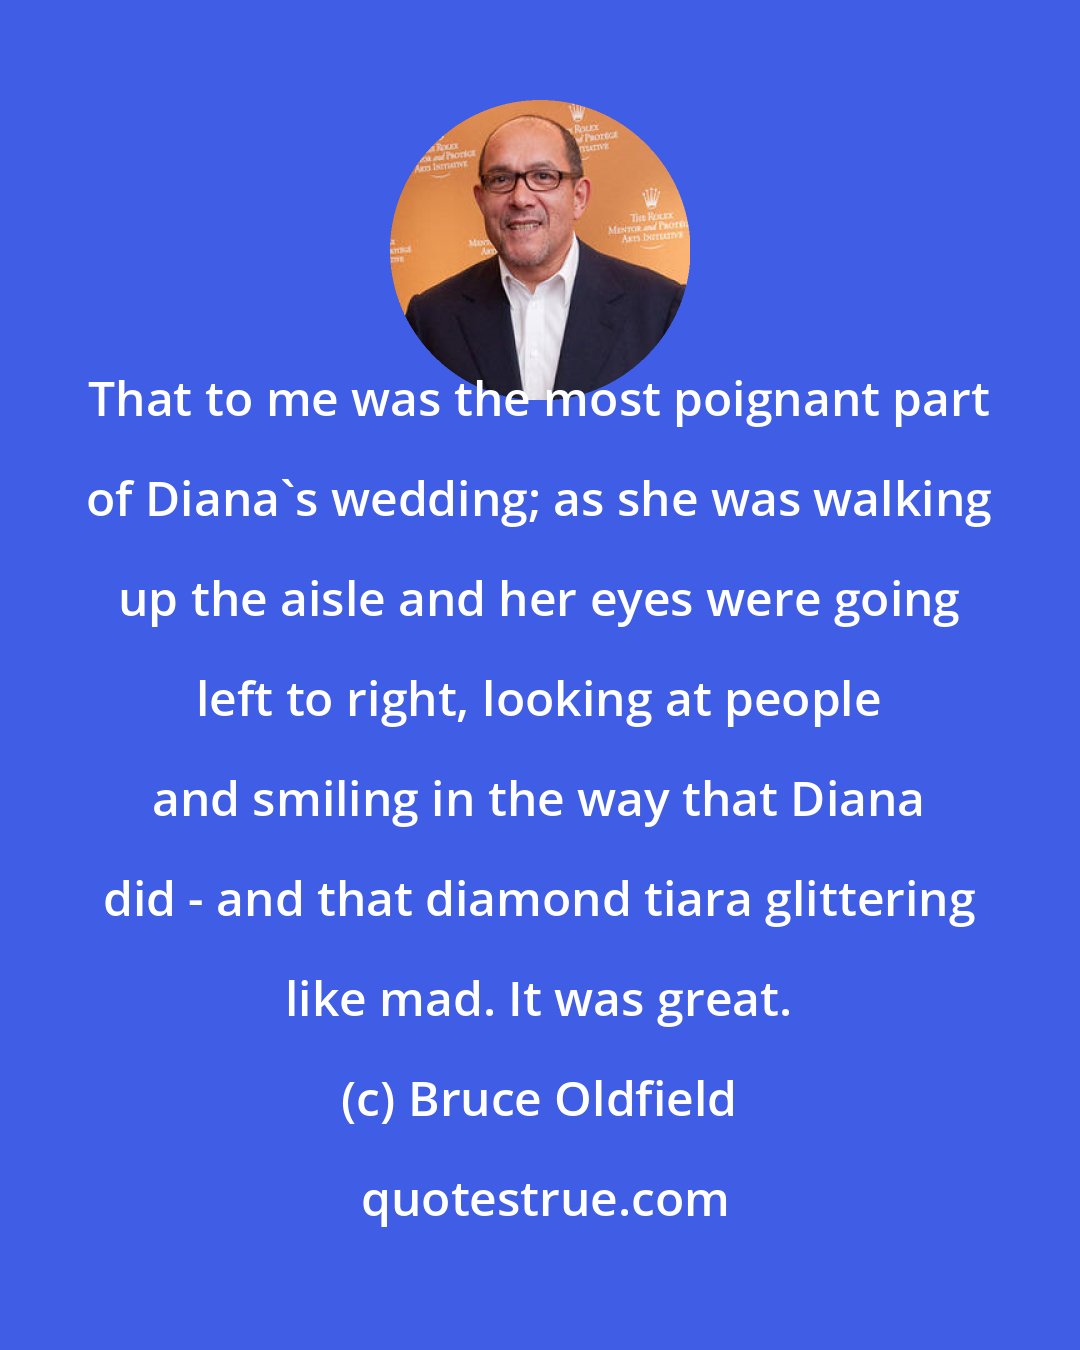 Bruce Oldfield: That to me was the most poignant part of Diana's wedding; as she was walking up the aisle and her eyes were going left to right, looking at people and smiling in the way that Diana did - and that diamond tiara glittering like mad. It was great.